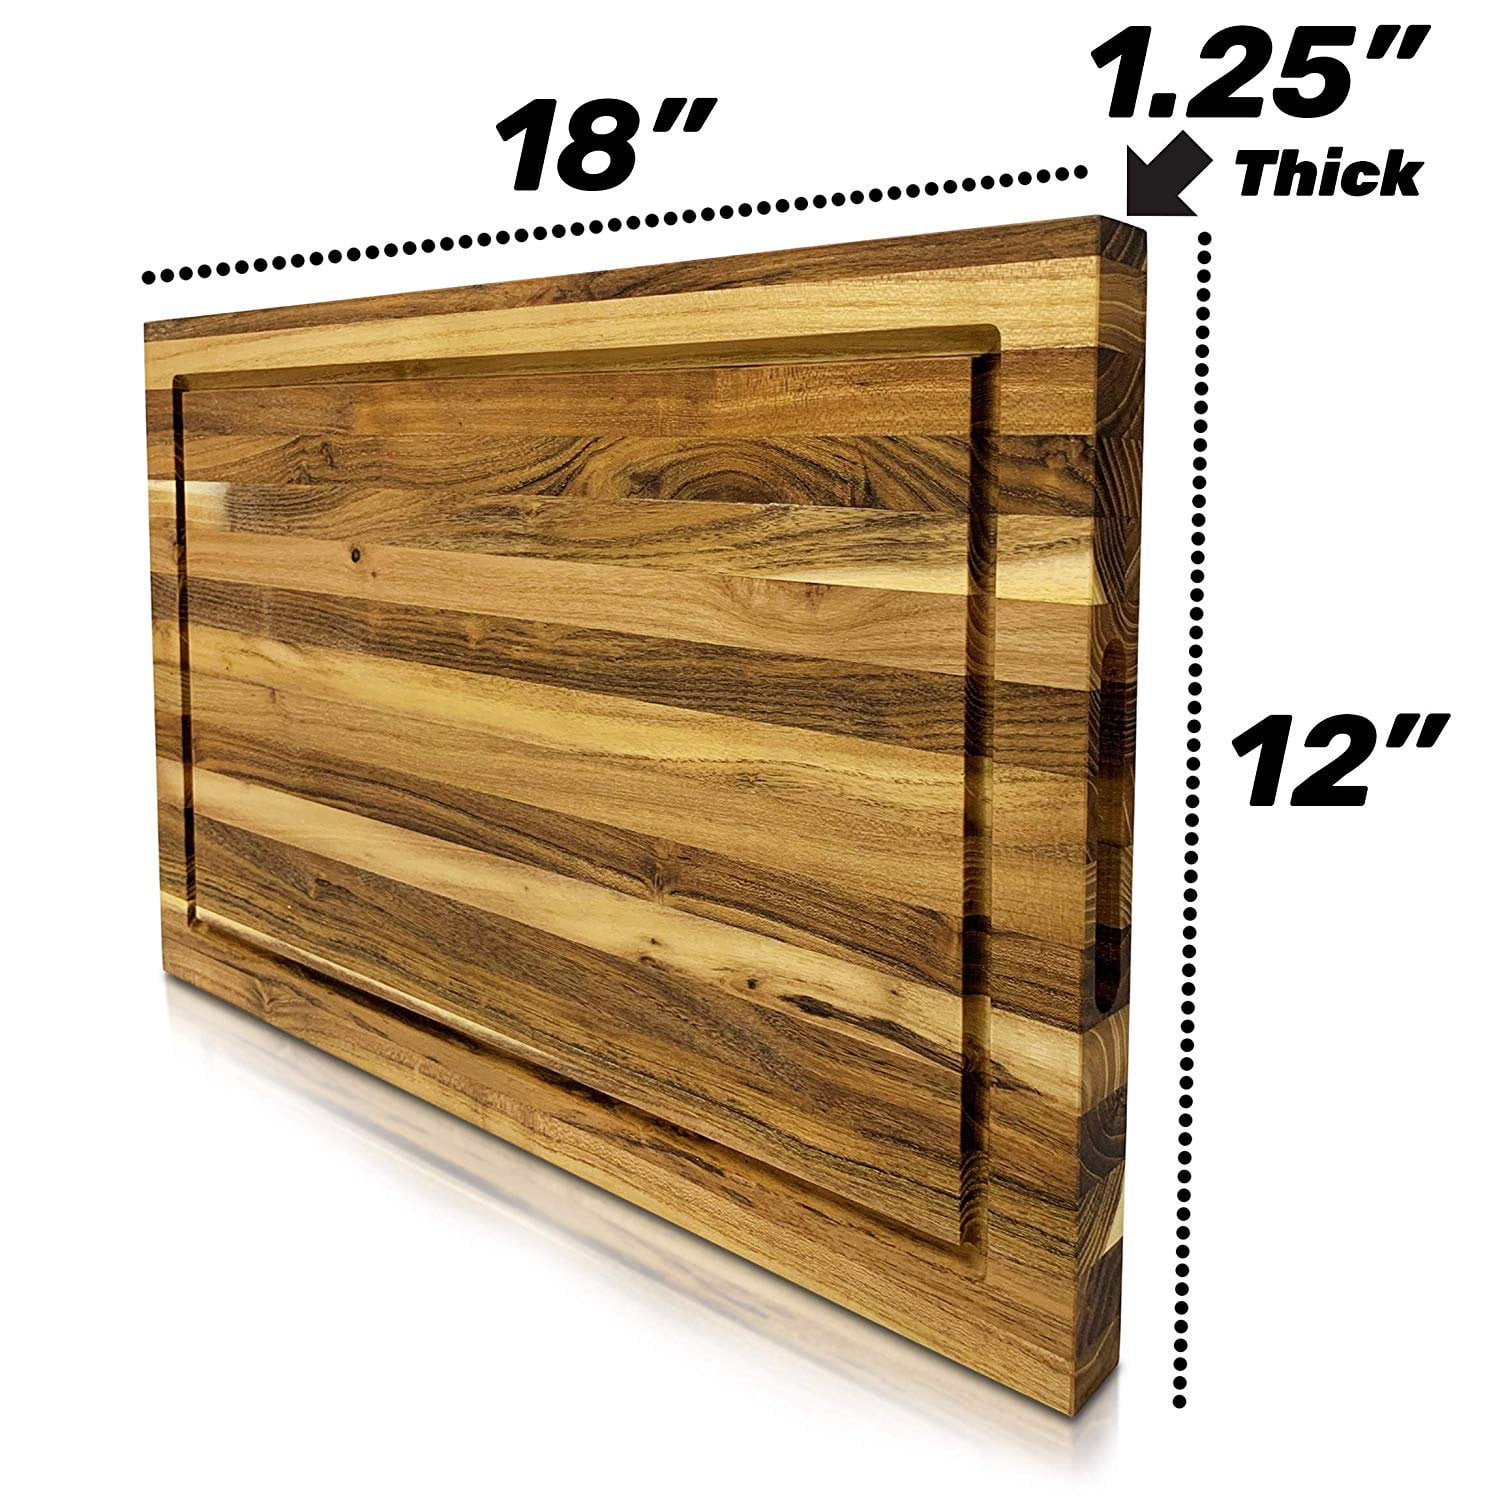 Extra Large Reversible Teak Wood Cutting Board 18x12x1.25 Butcher Block With...